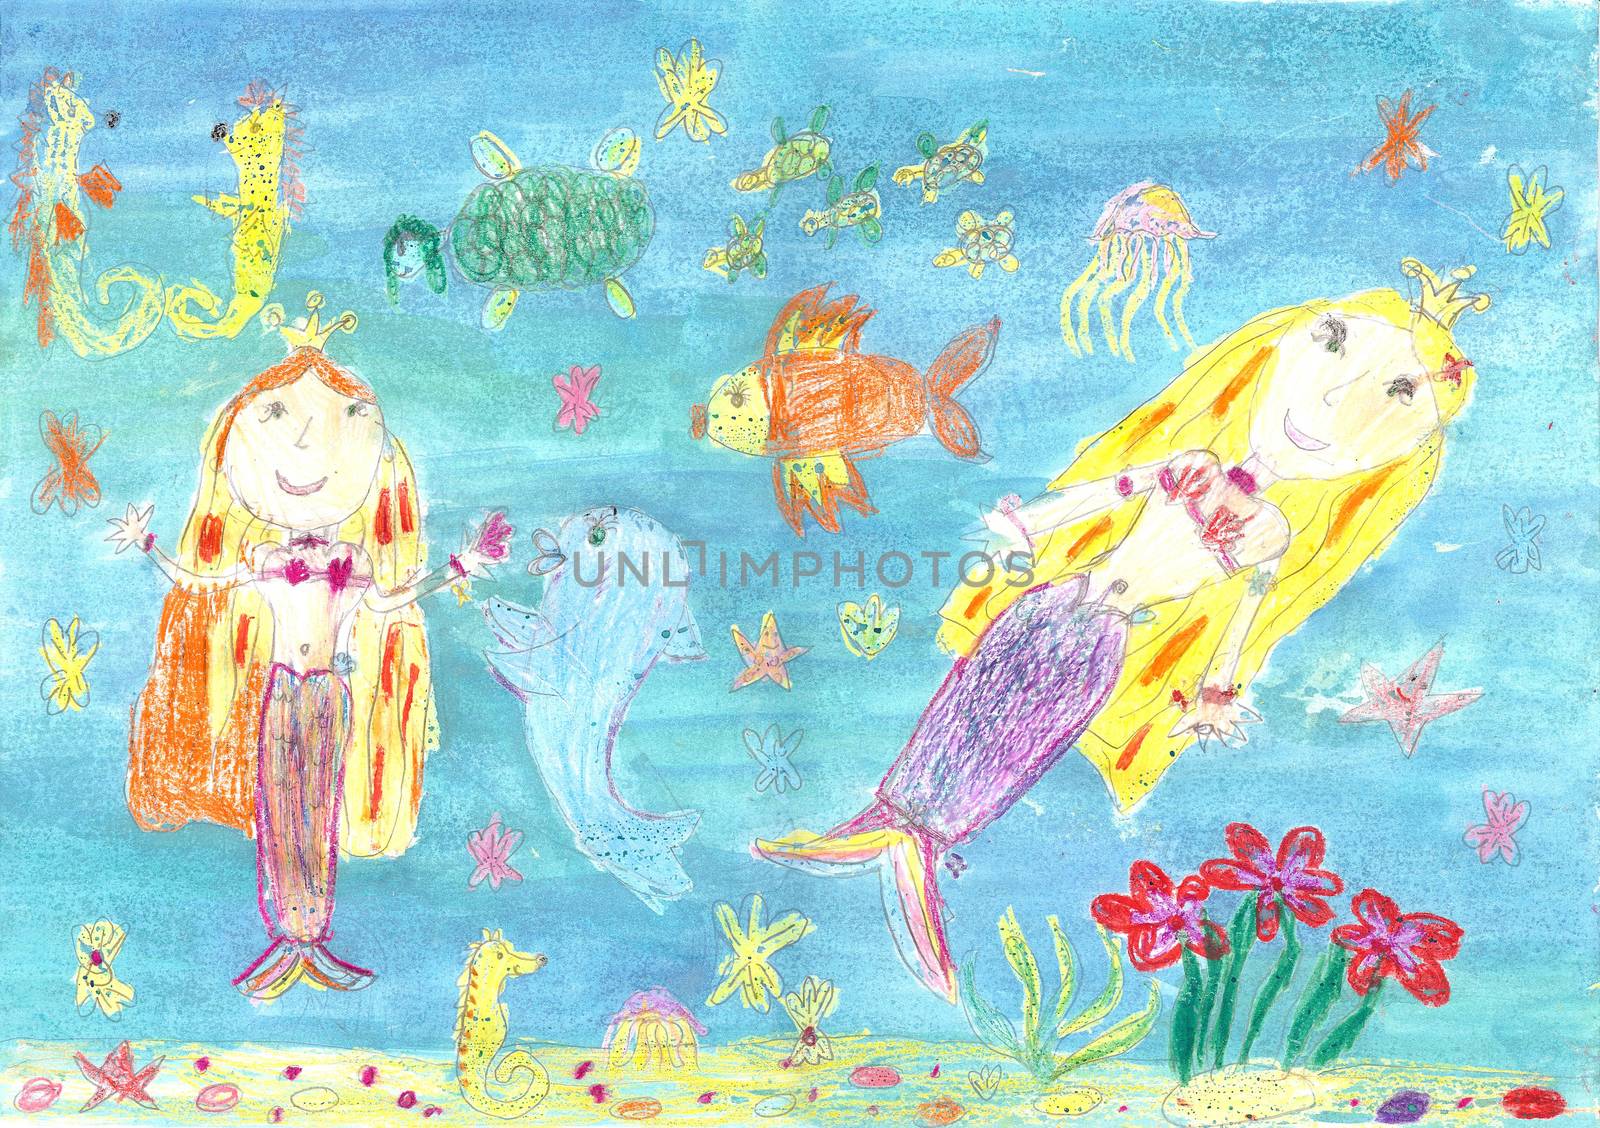 Children's drawing of a mermaid